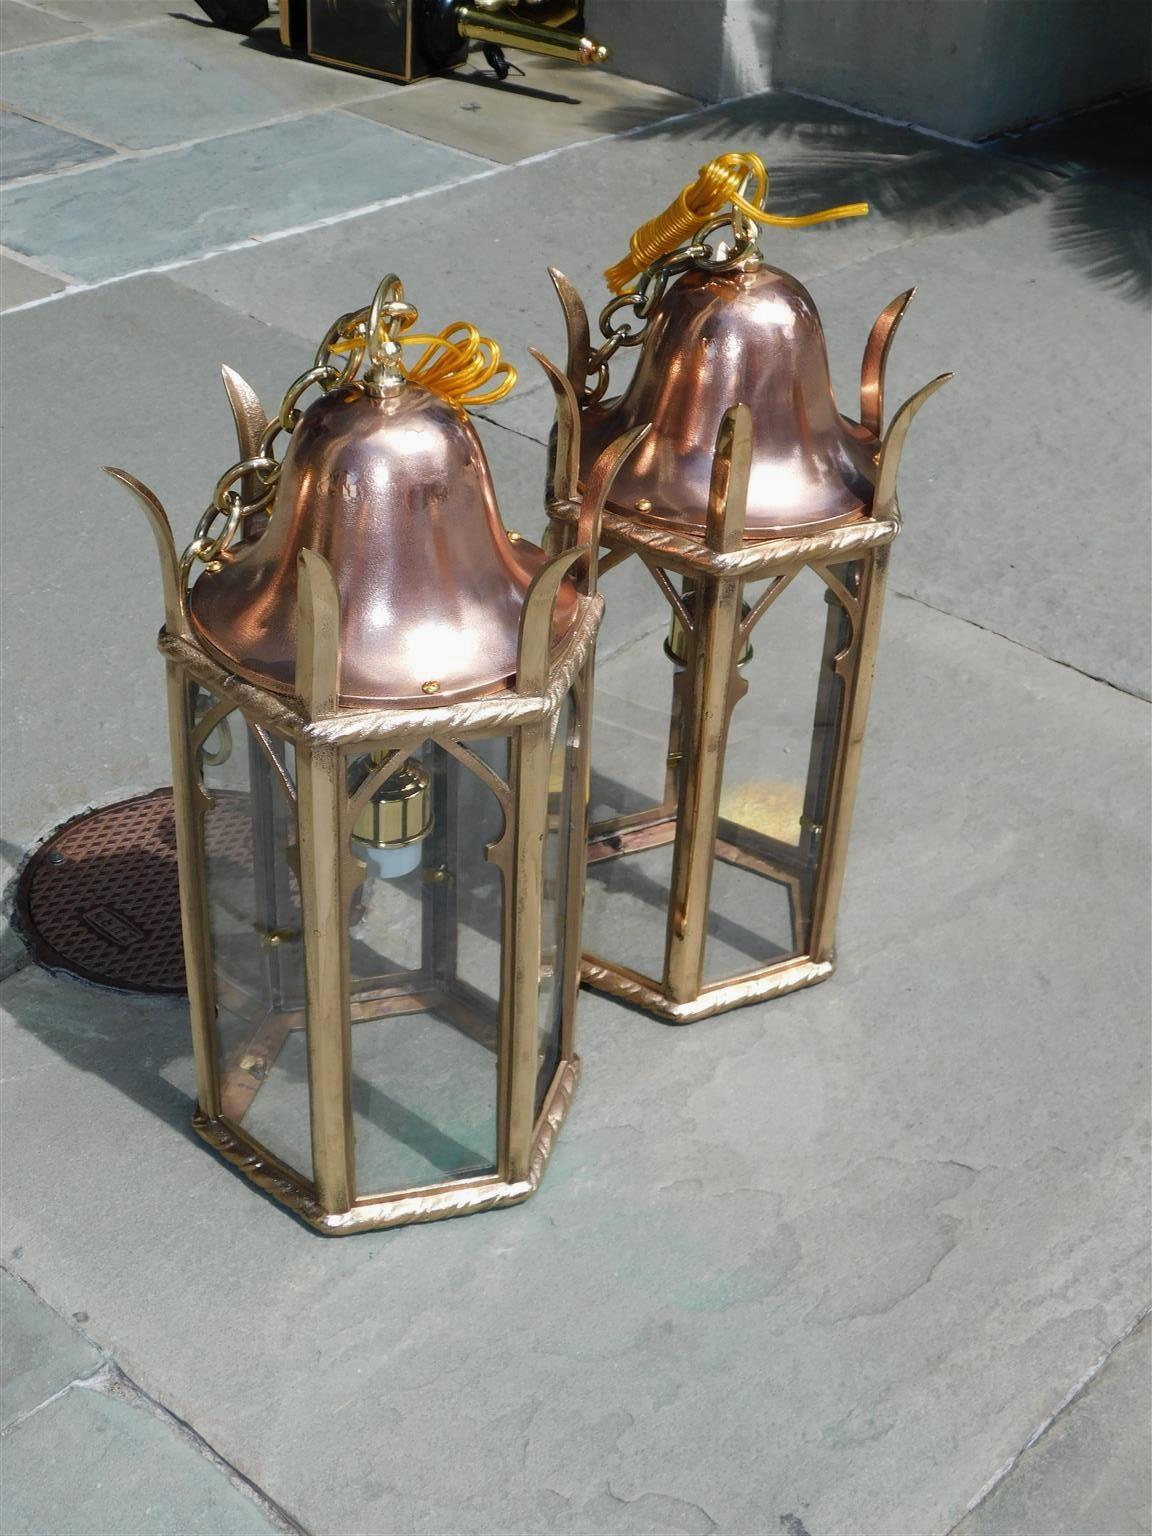 Pair of American dome finial copper and brass decorative hanging paneled glass hall lanterns. Originally gas and have been electrified with single interior socket. Mid 19th century.